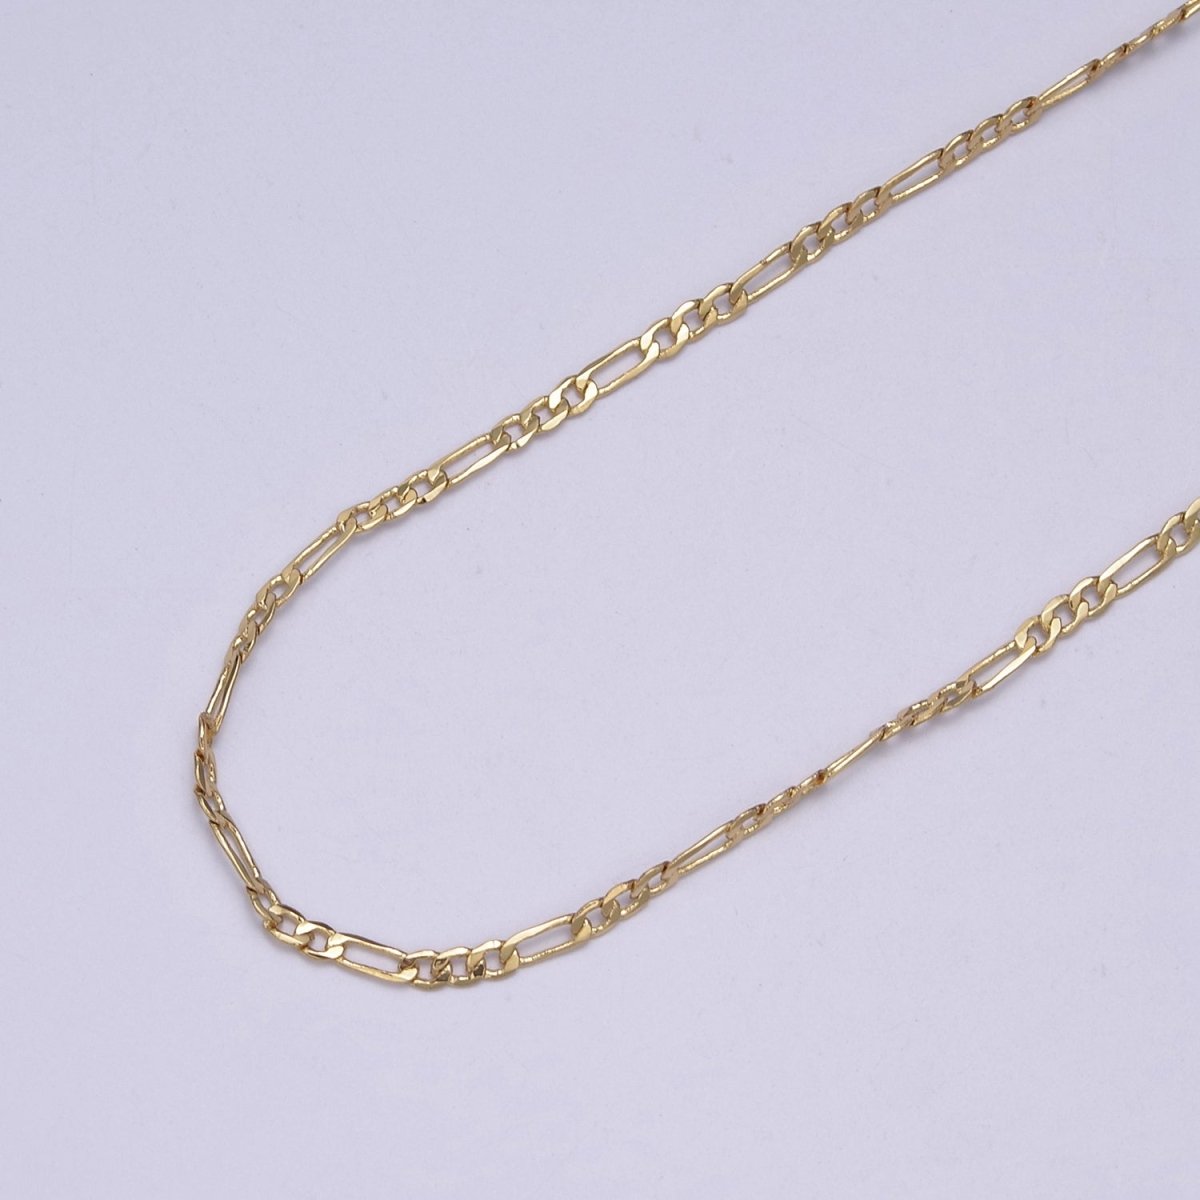 24K Gold Filled Flat Figaro Chain, Dainty 2mm Unfinished Chain in Gold & Silver For Jewelry Making | ROLL-670, ROLL-671 Clearnce Pricing - DLUXCA